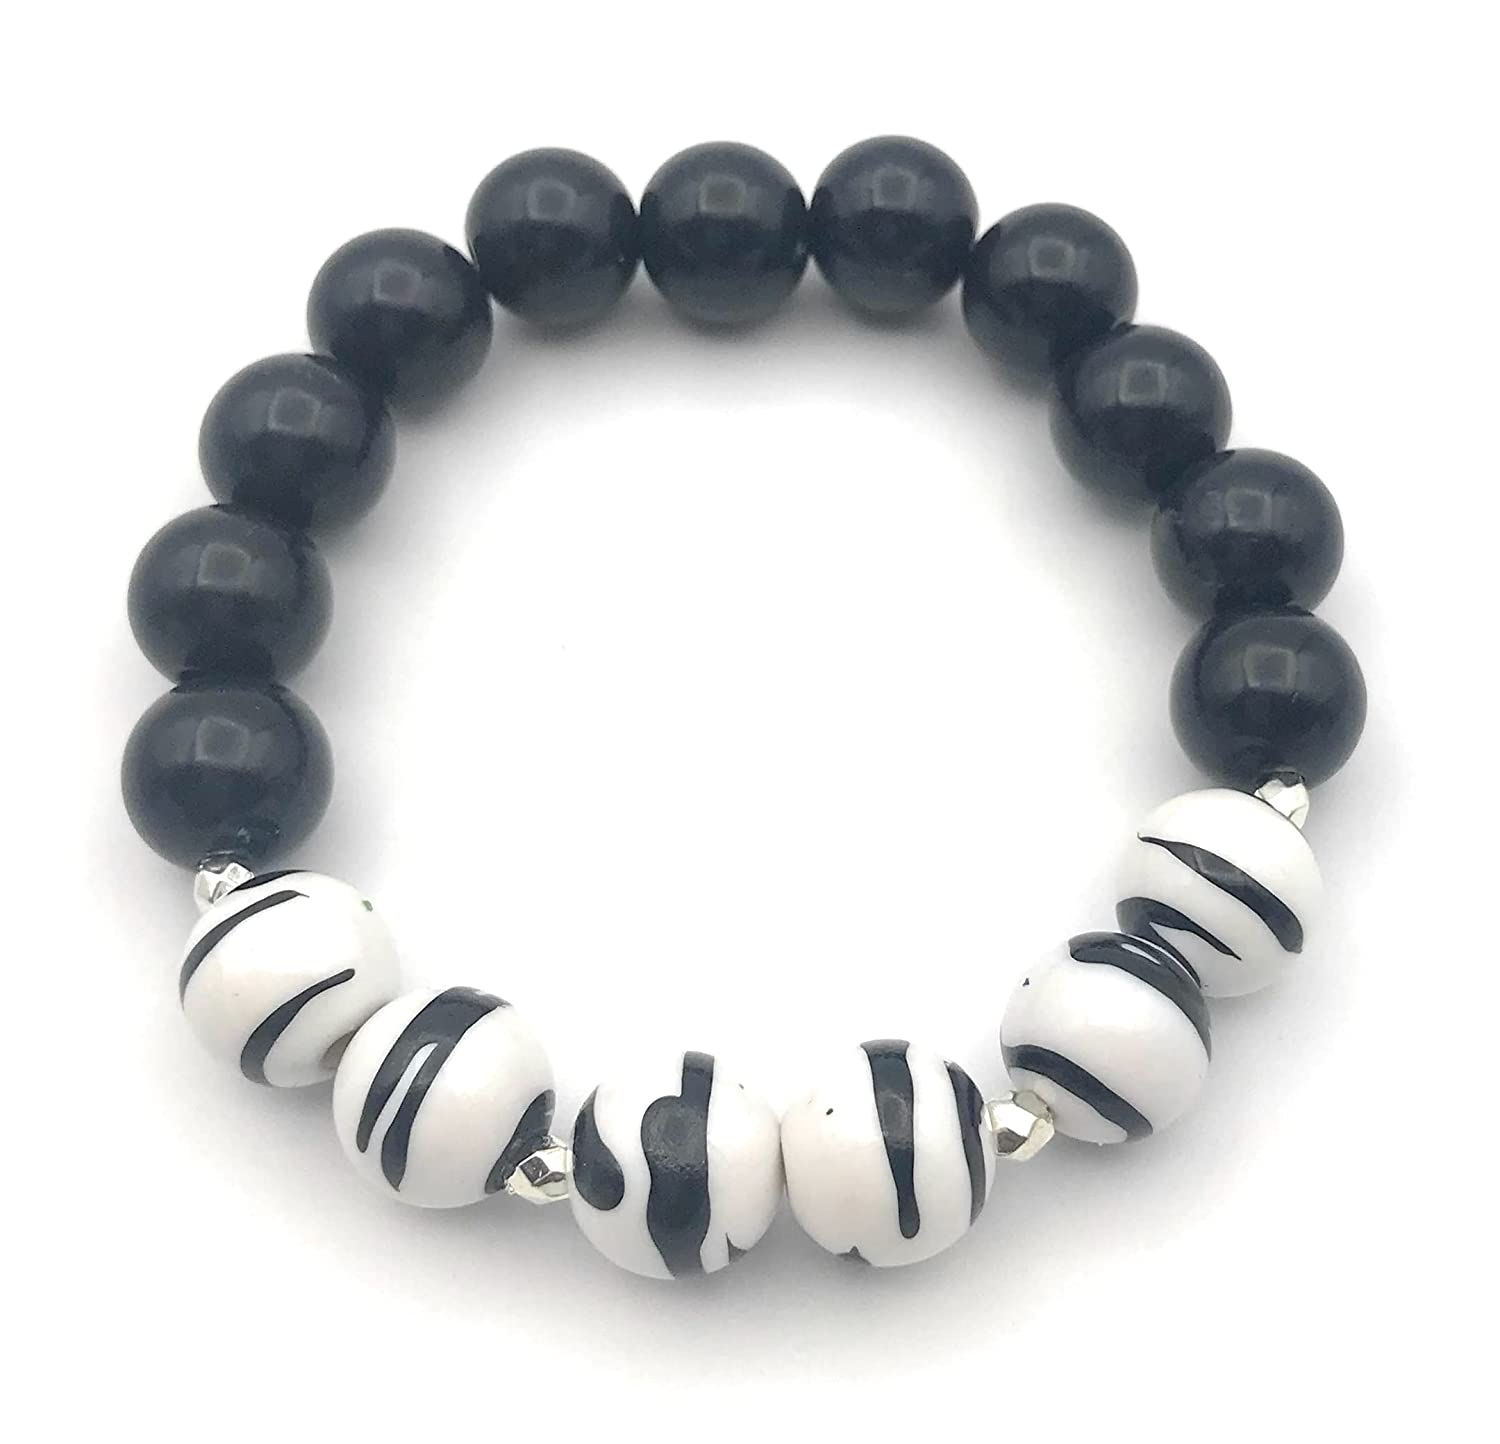 Black and White Beaded Stretch Bracelet with Silver Accents from Scott D Jewelry Designs